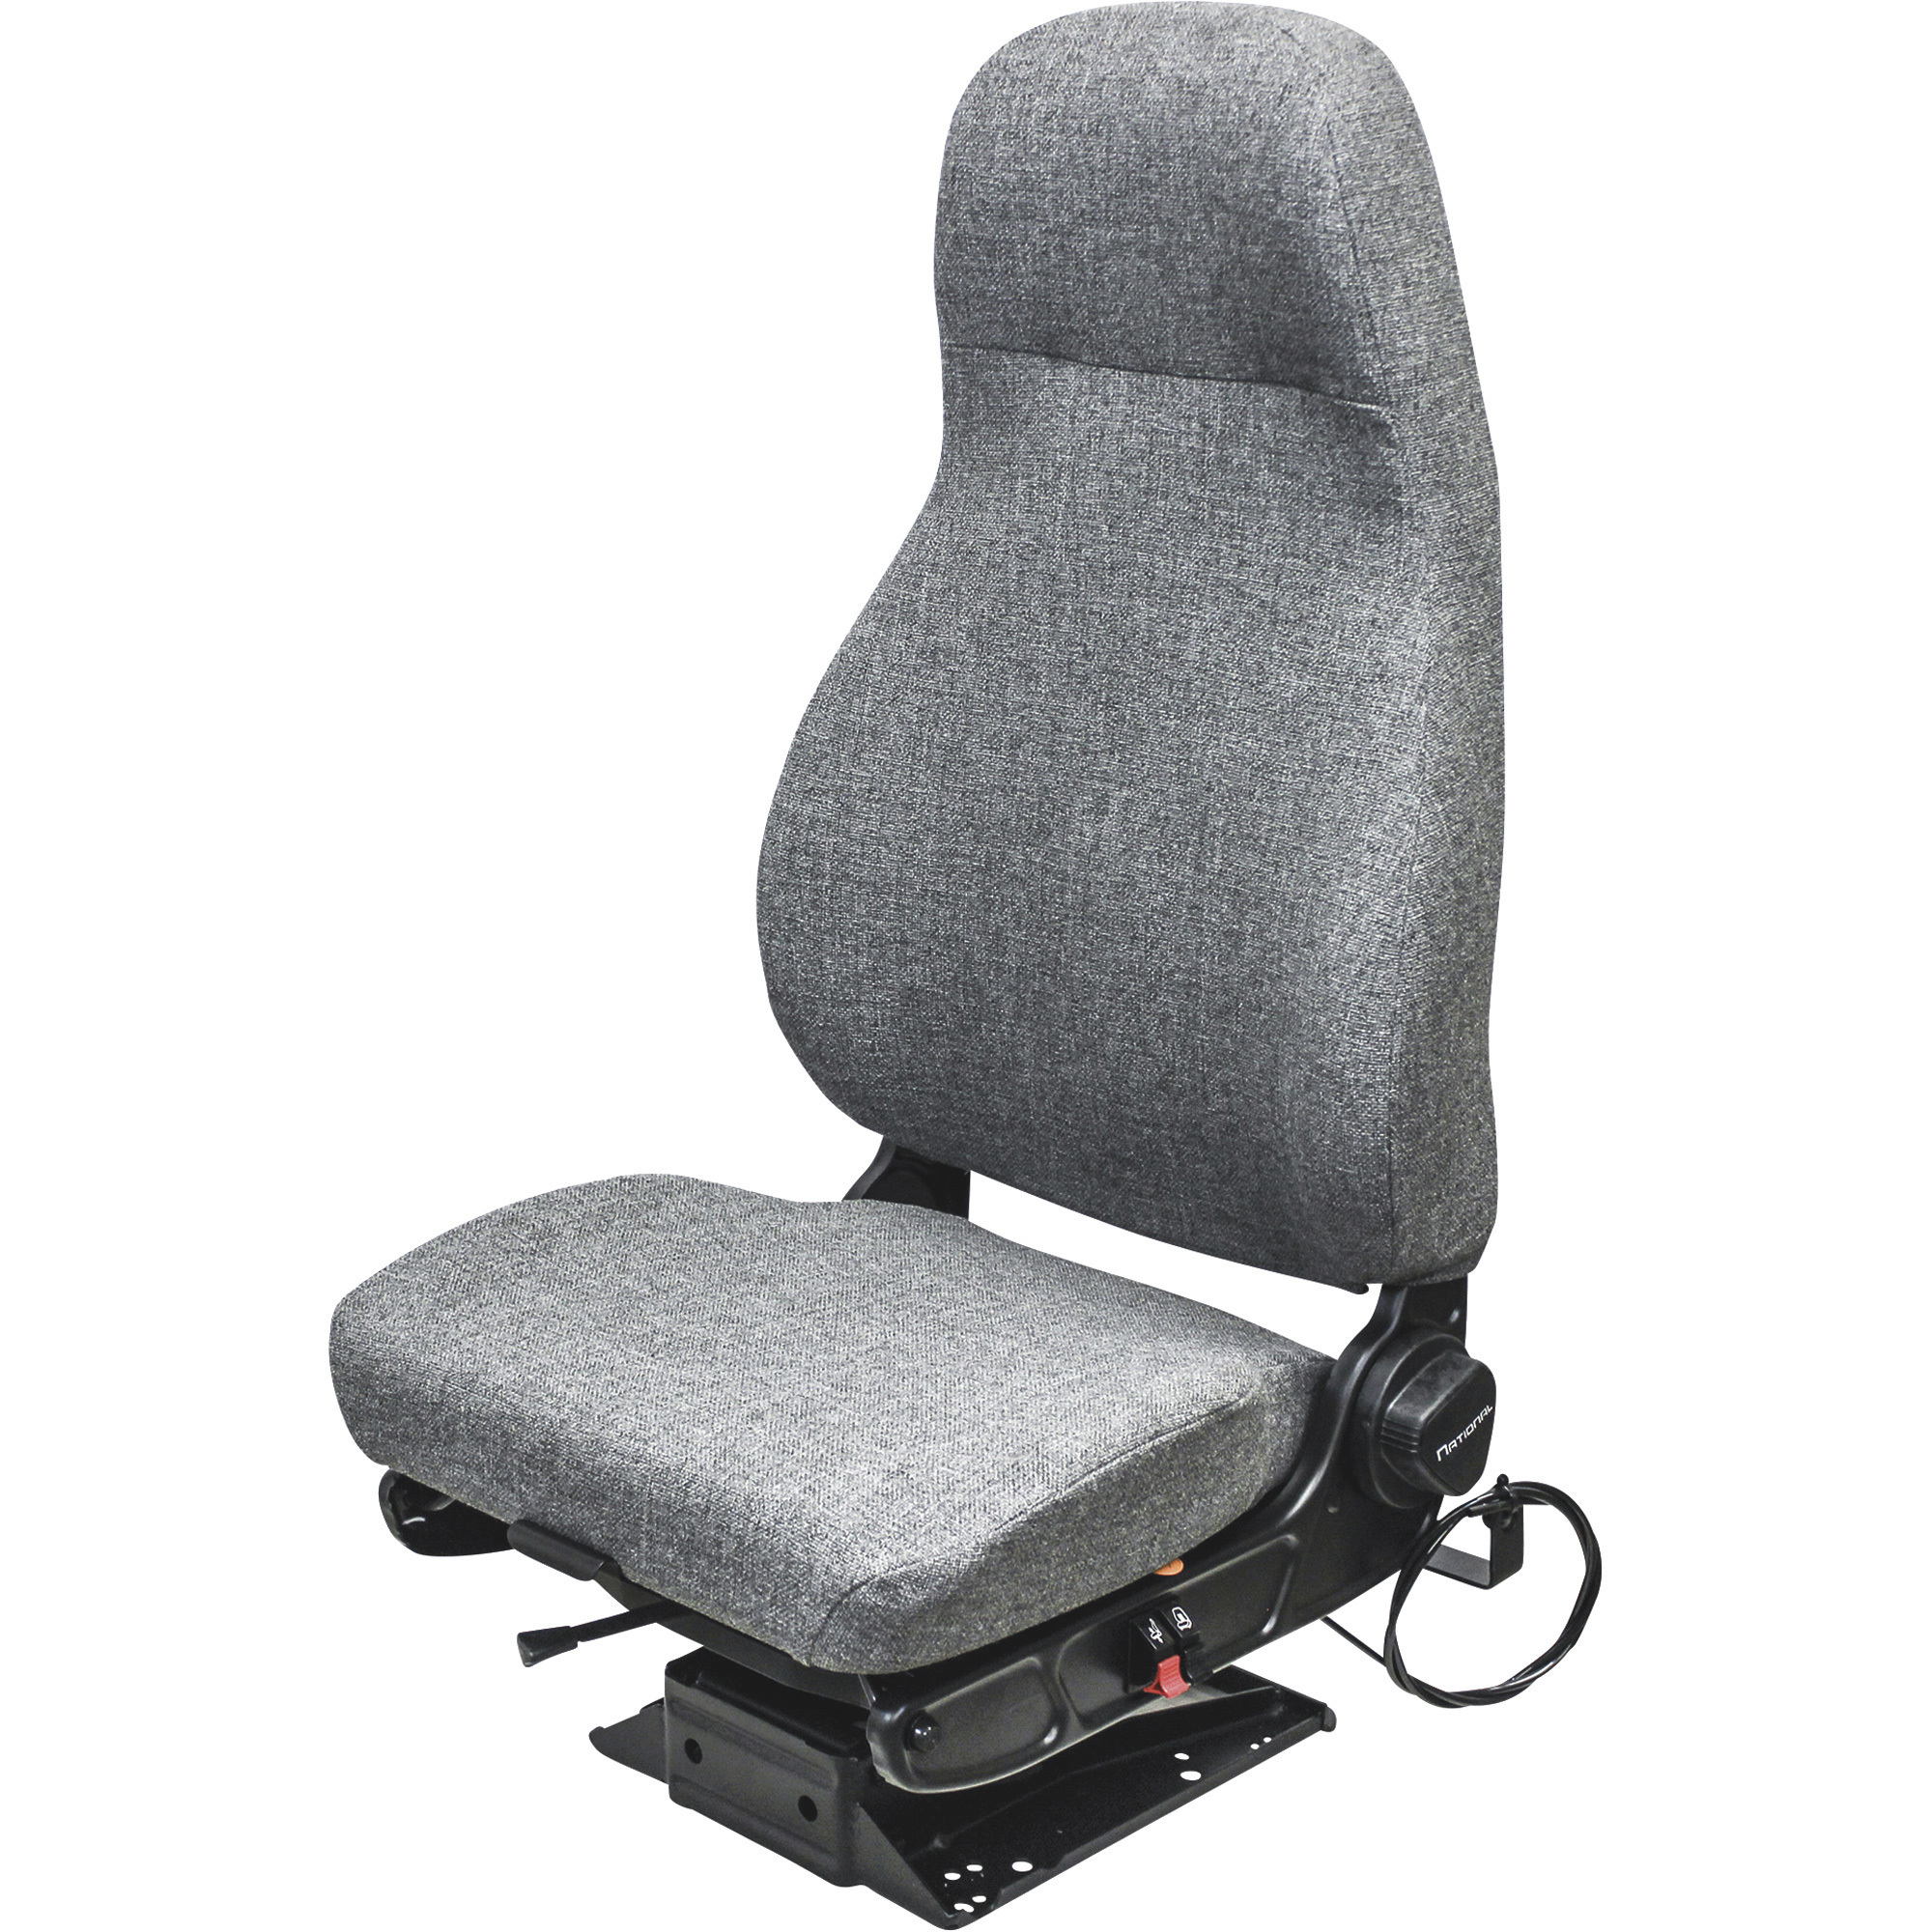 K & M Manufacturing Ensign Lo Truck Seat, Gray